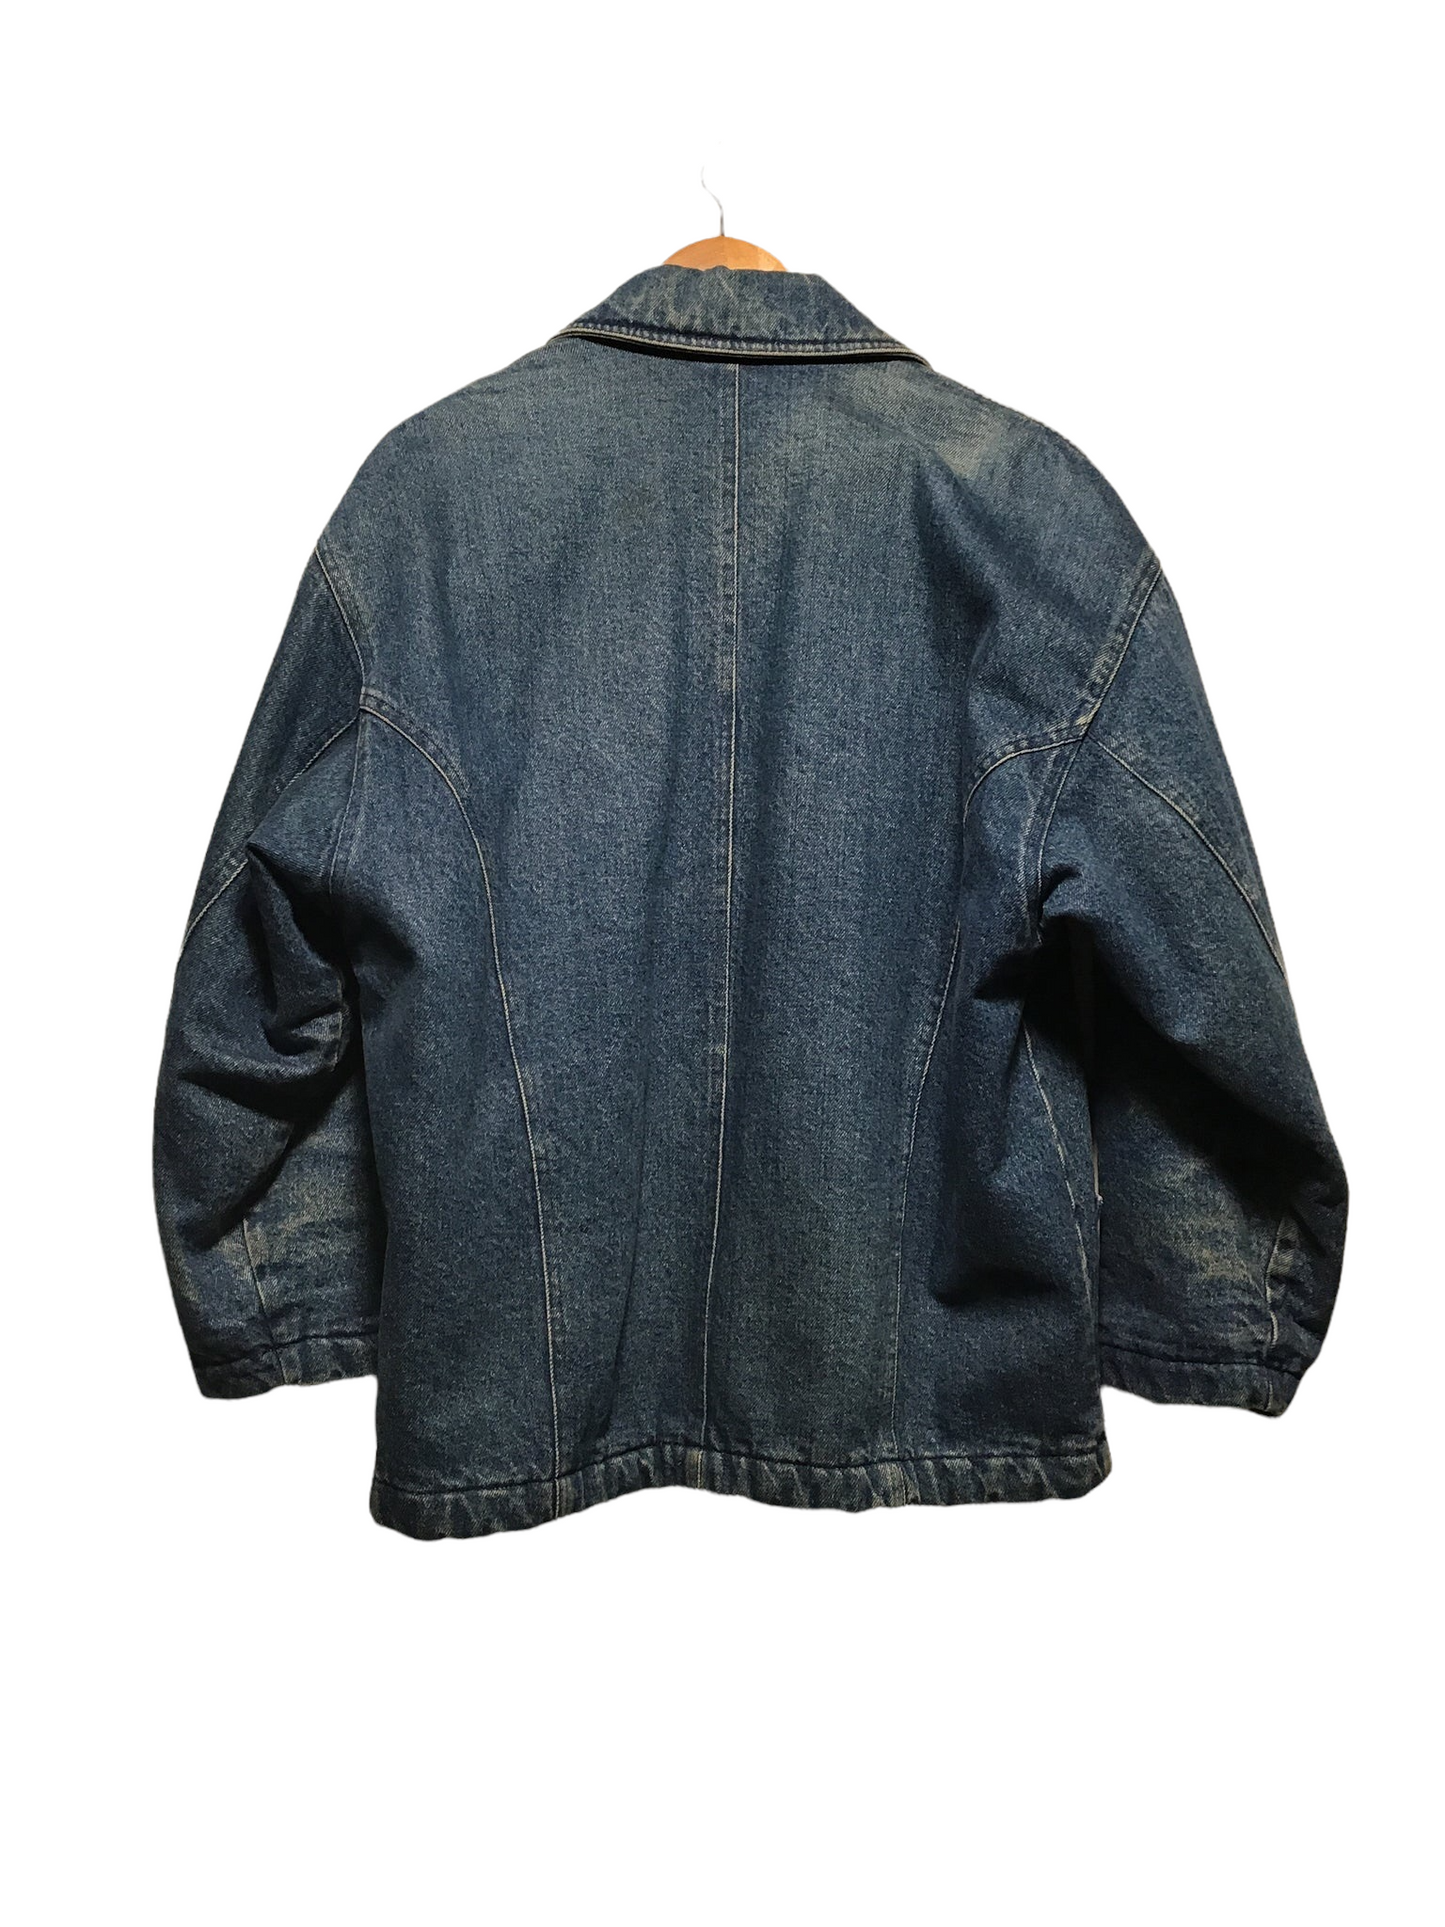 Quilted New Man Denim Jacket (Size S)